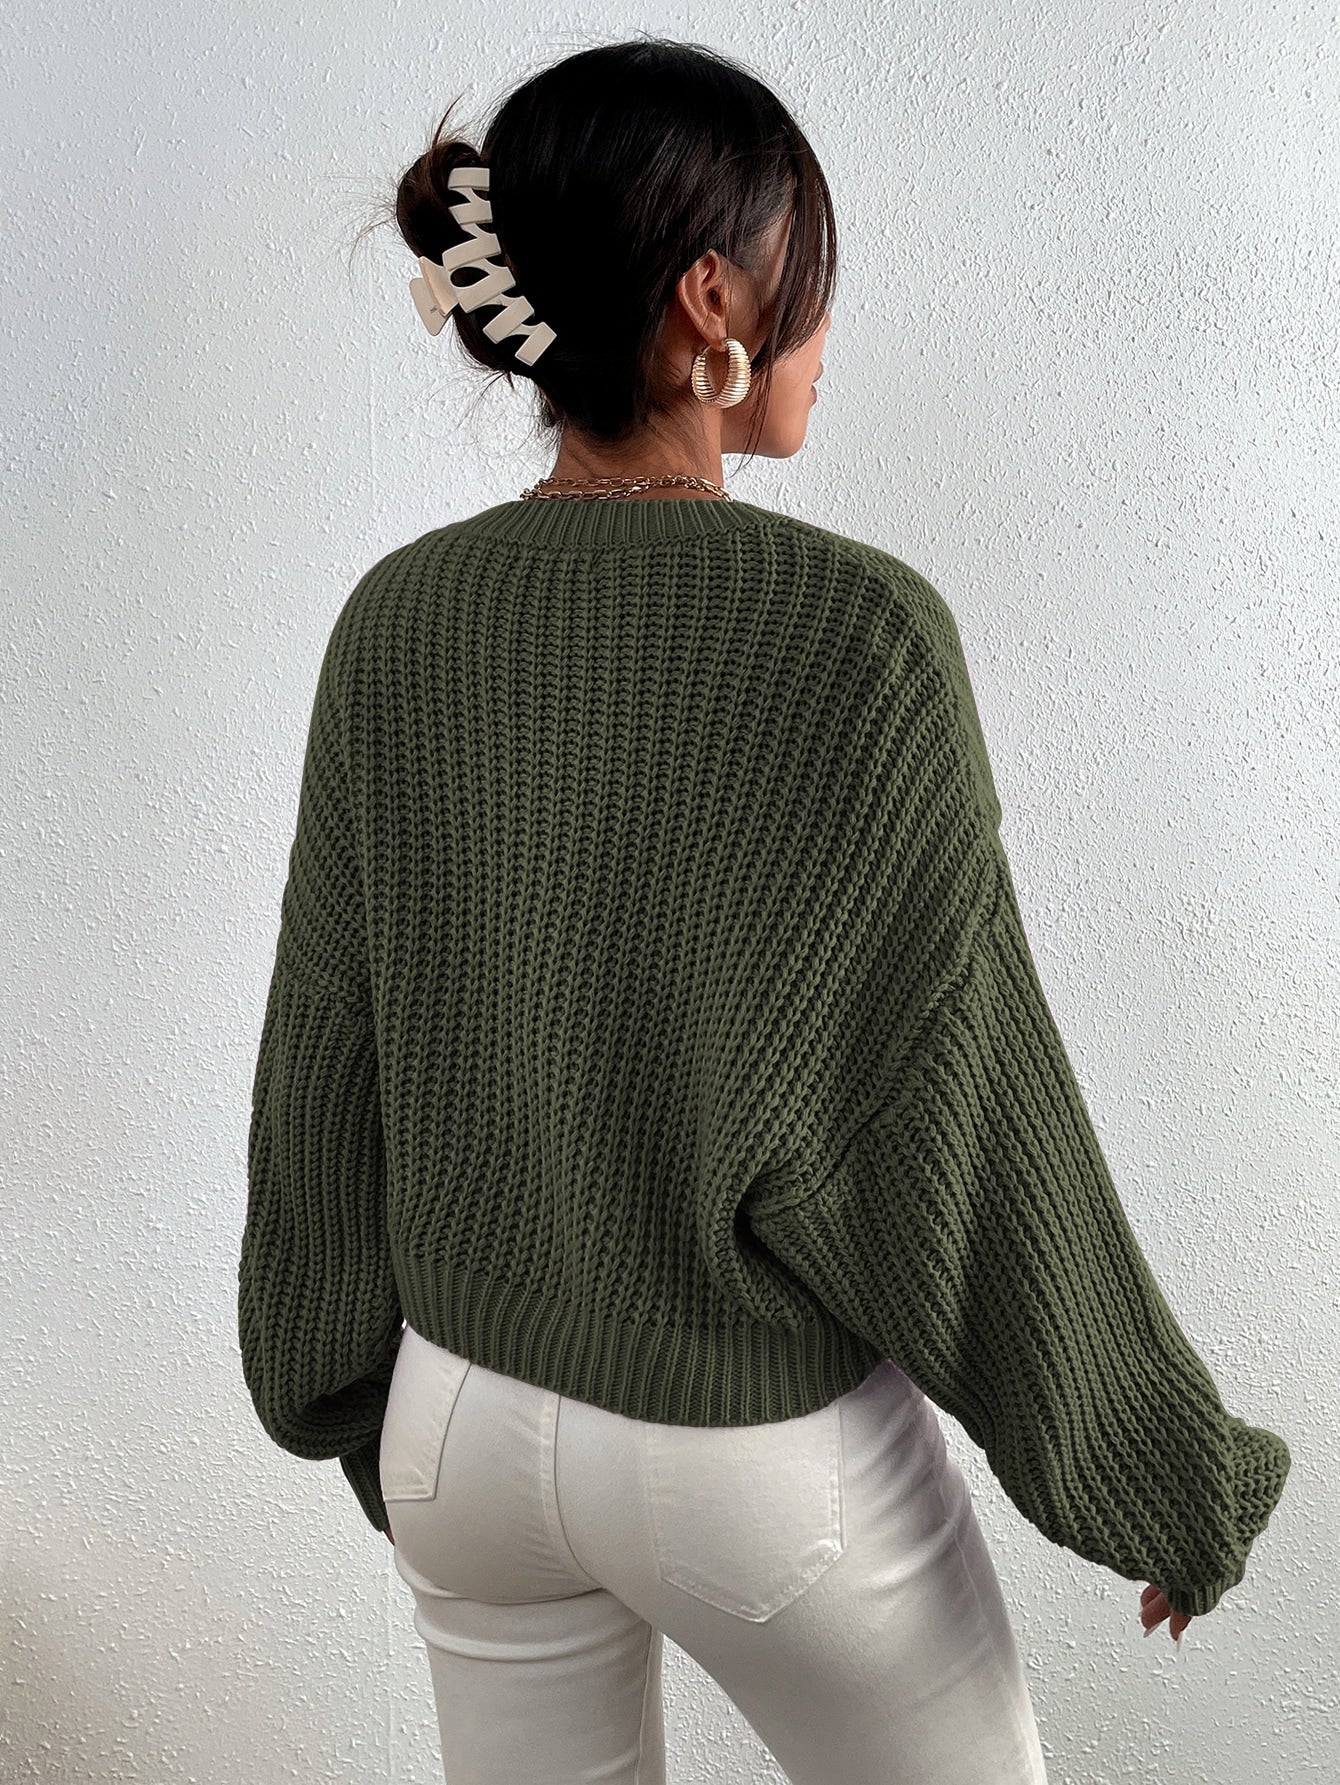 Frenchy Pullover mit Rippenstrick Drop Shoulder